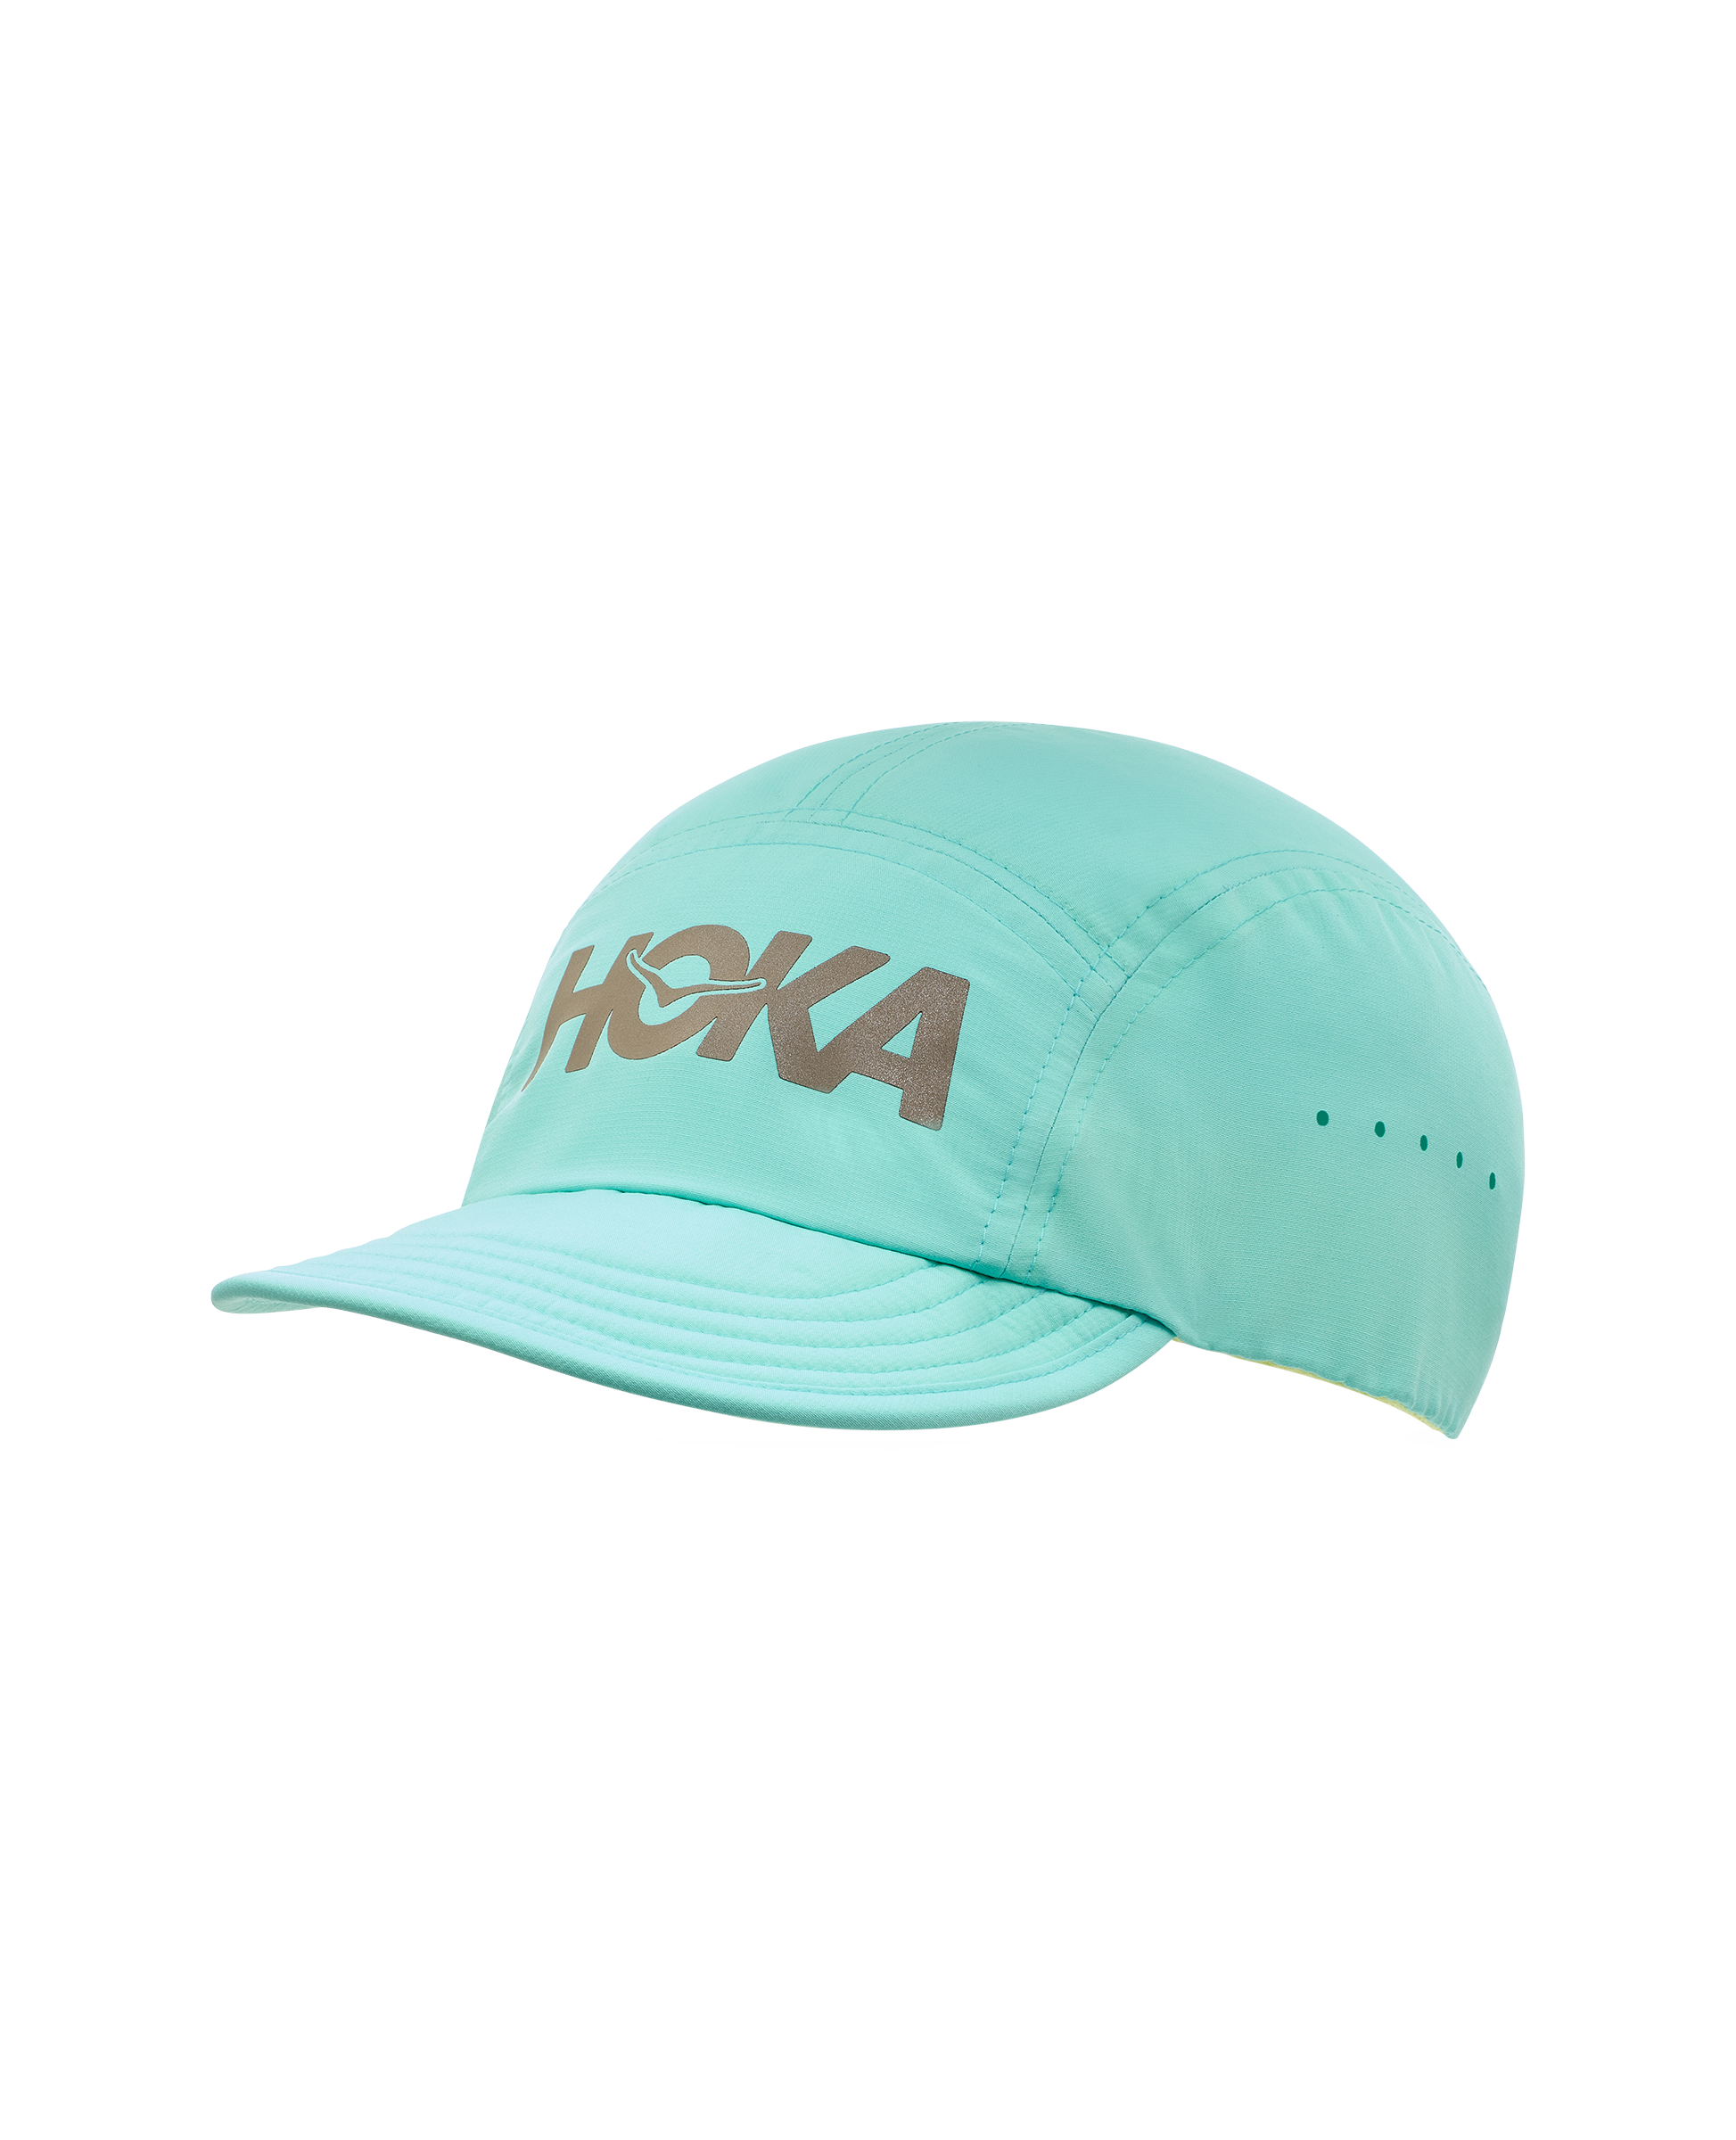 Hoka Packable Trail Hat Cloudless